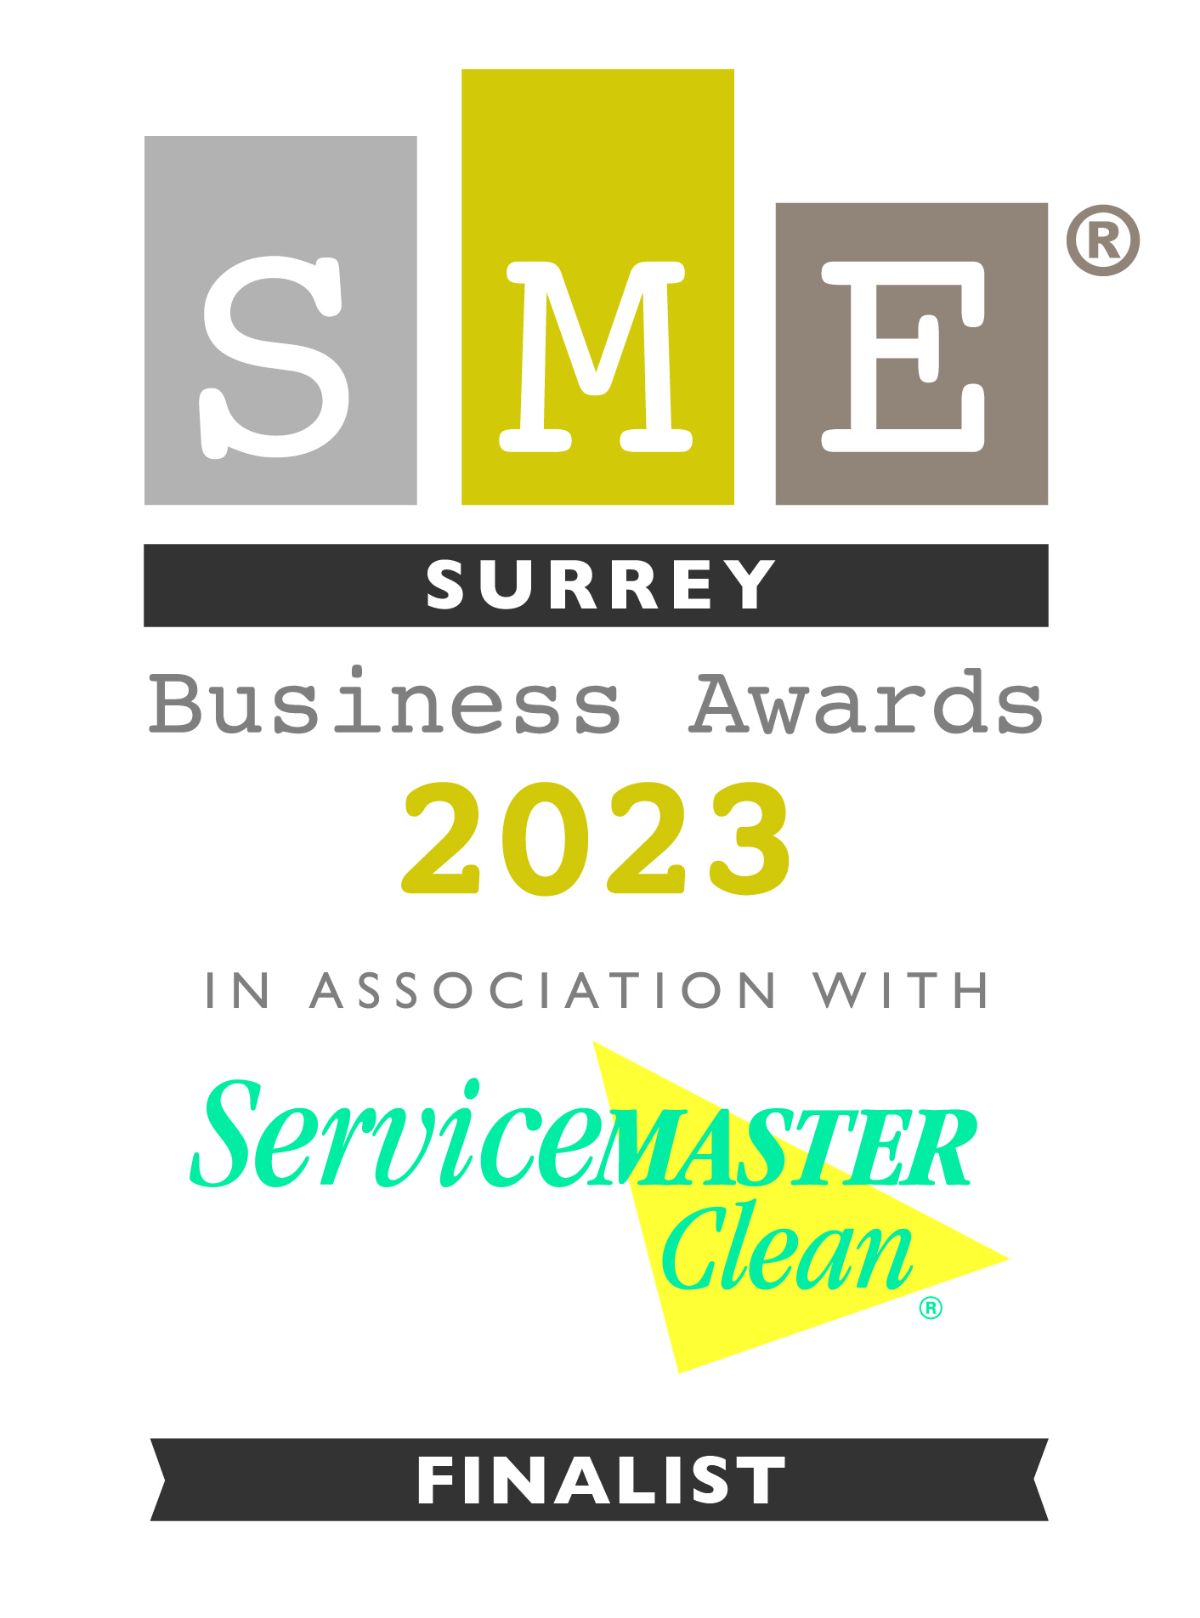 Customer Service Excellence Finalist in Surrey Small Business Awards